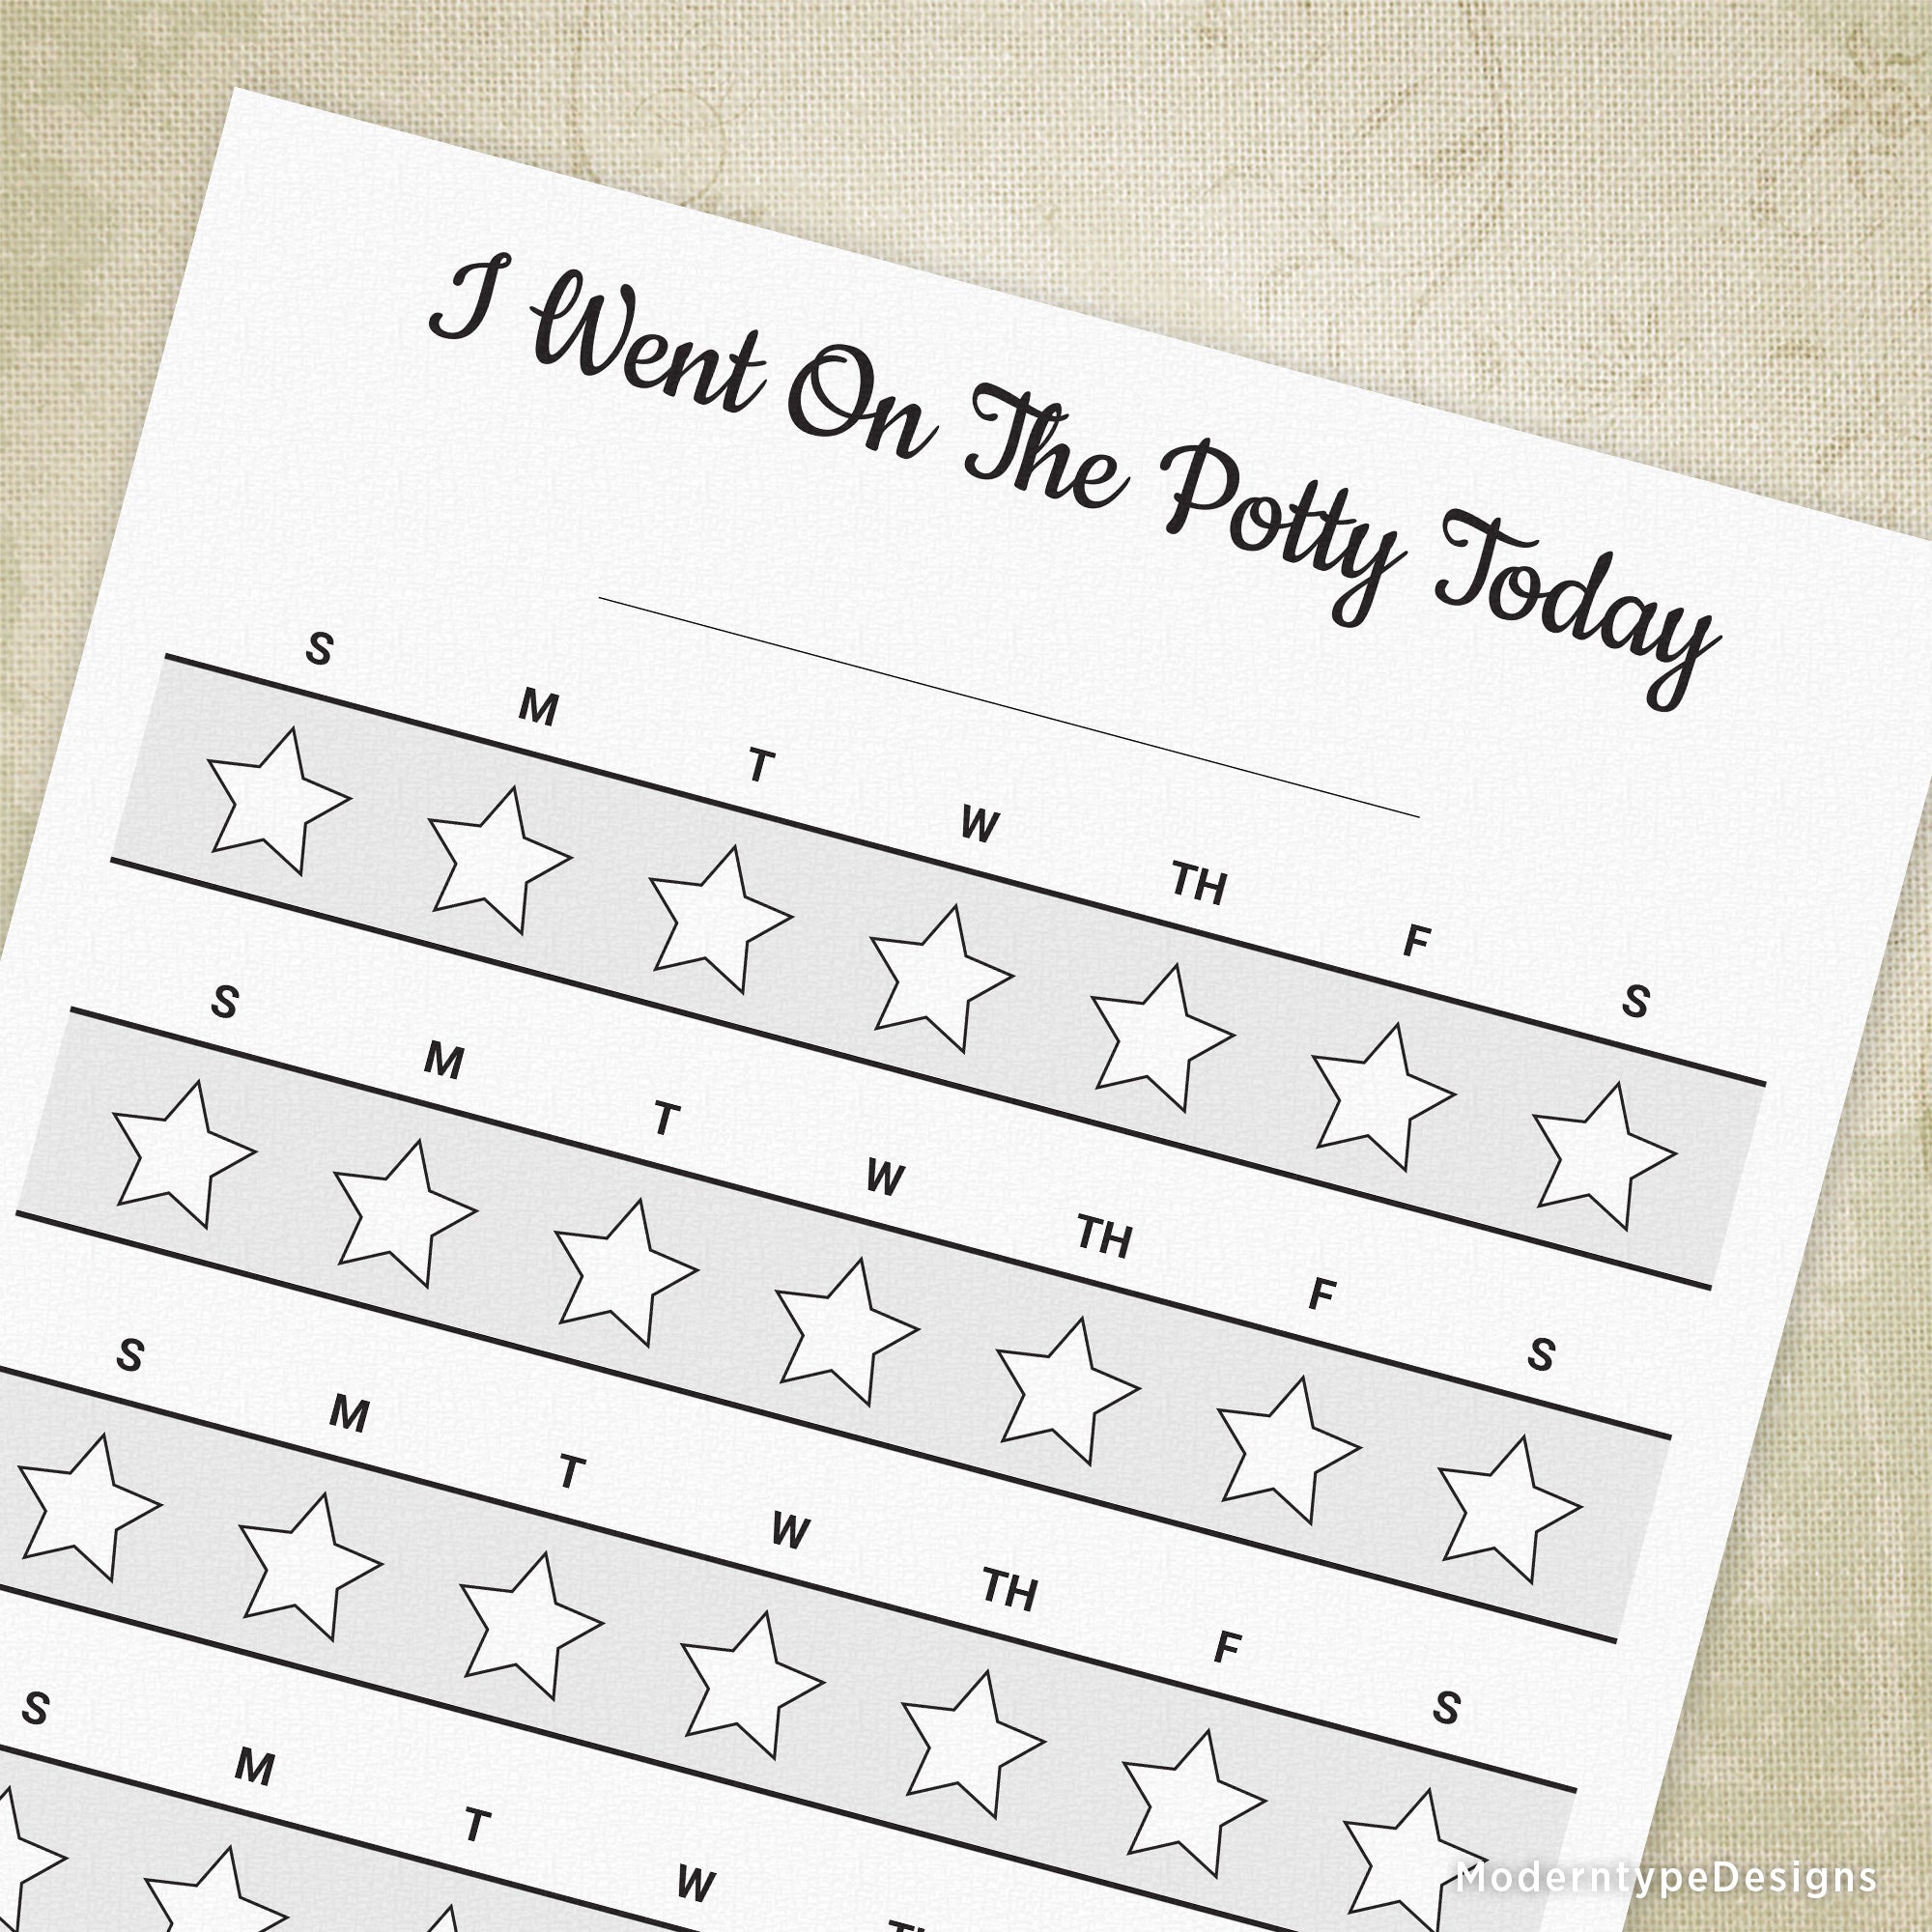 I Went On The Potty Today Printable Chart